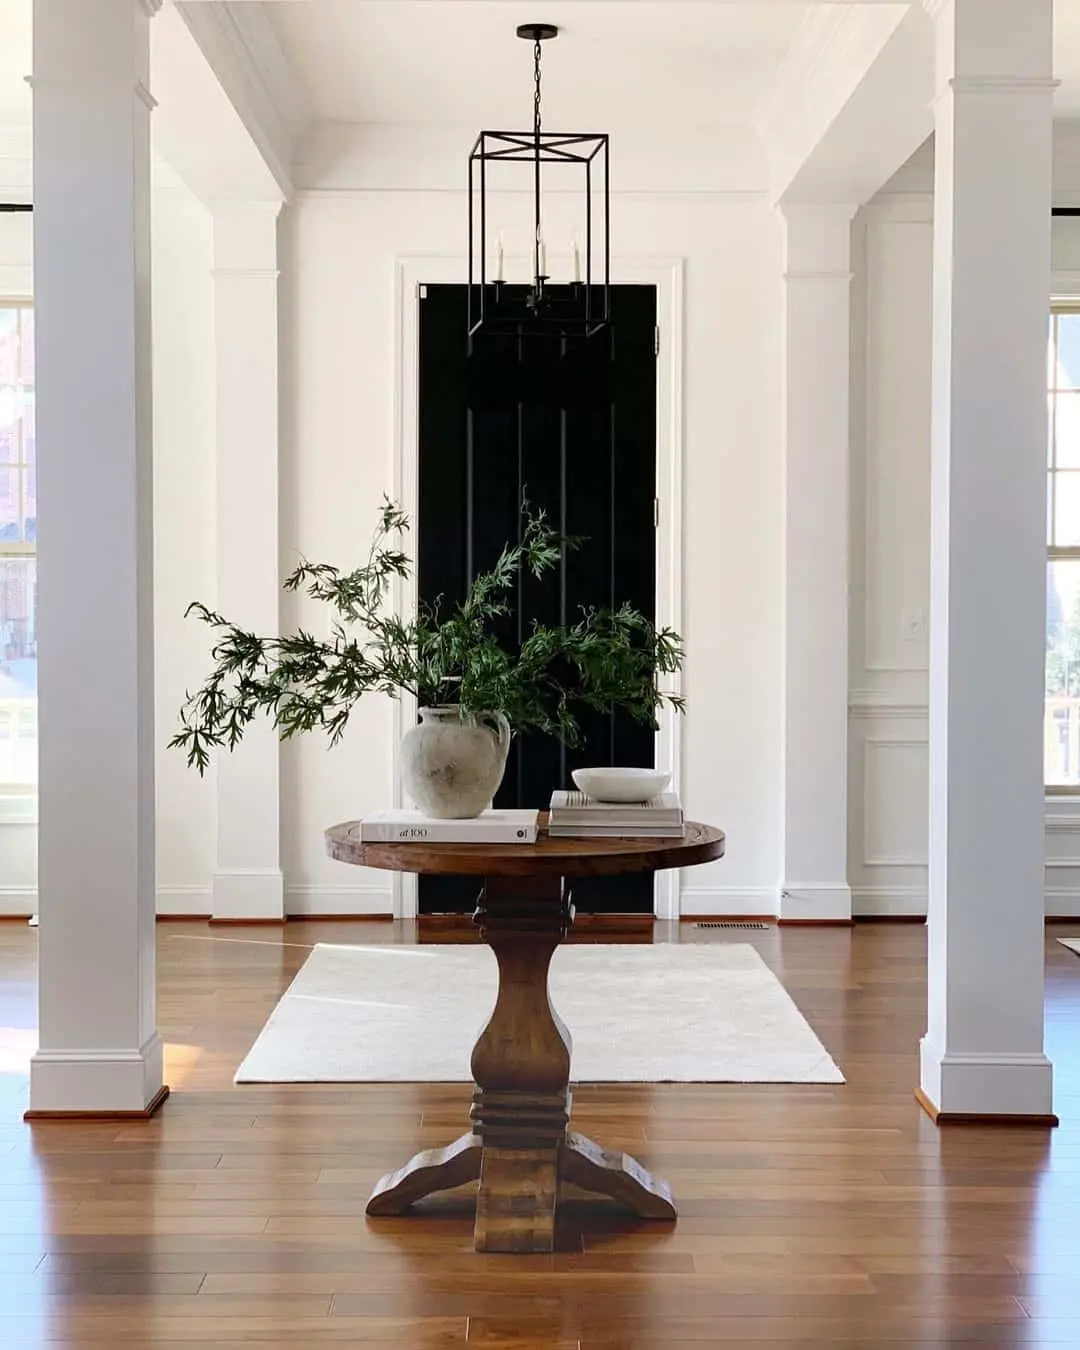 25 stunning round entryway table ideas; From rustic to modern, minimalist to chic, find the perfect piece to define your personal style and make a lasting first impression. Let's transform your entryway together!